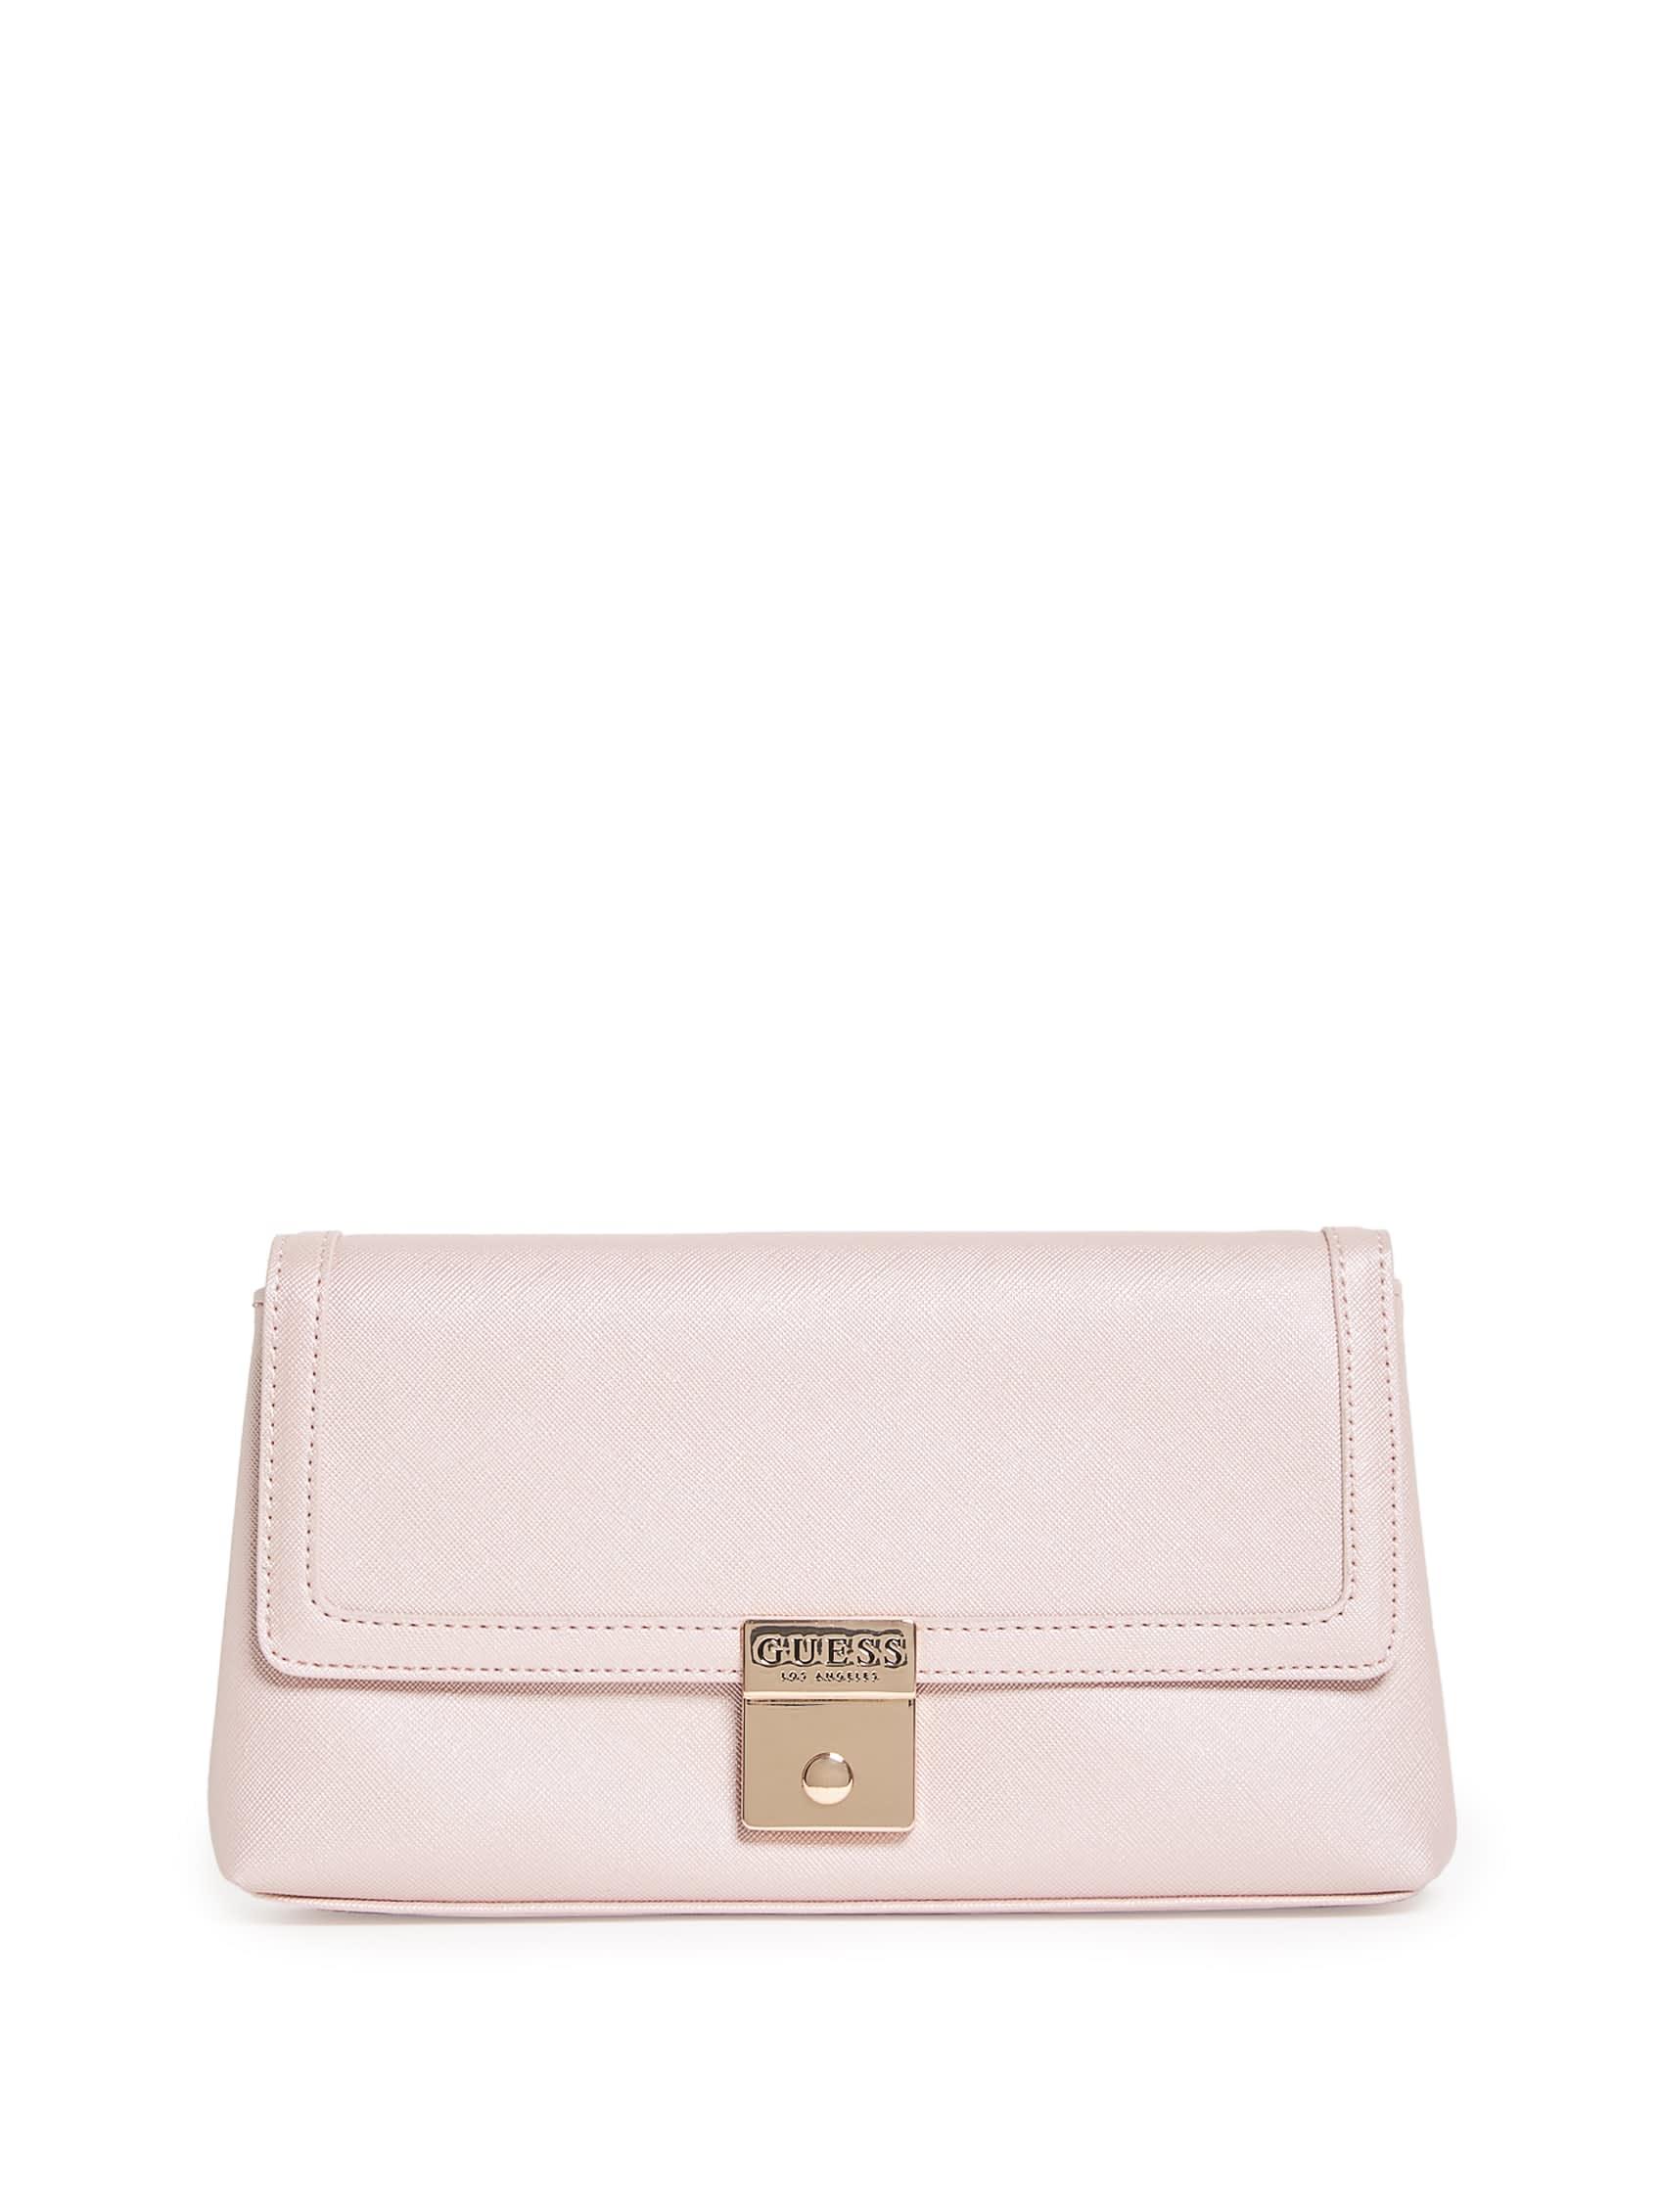 Guess Factory Sophie Clutch Crossbody in Pink